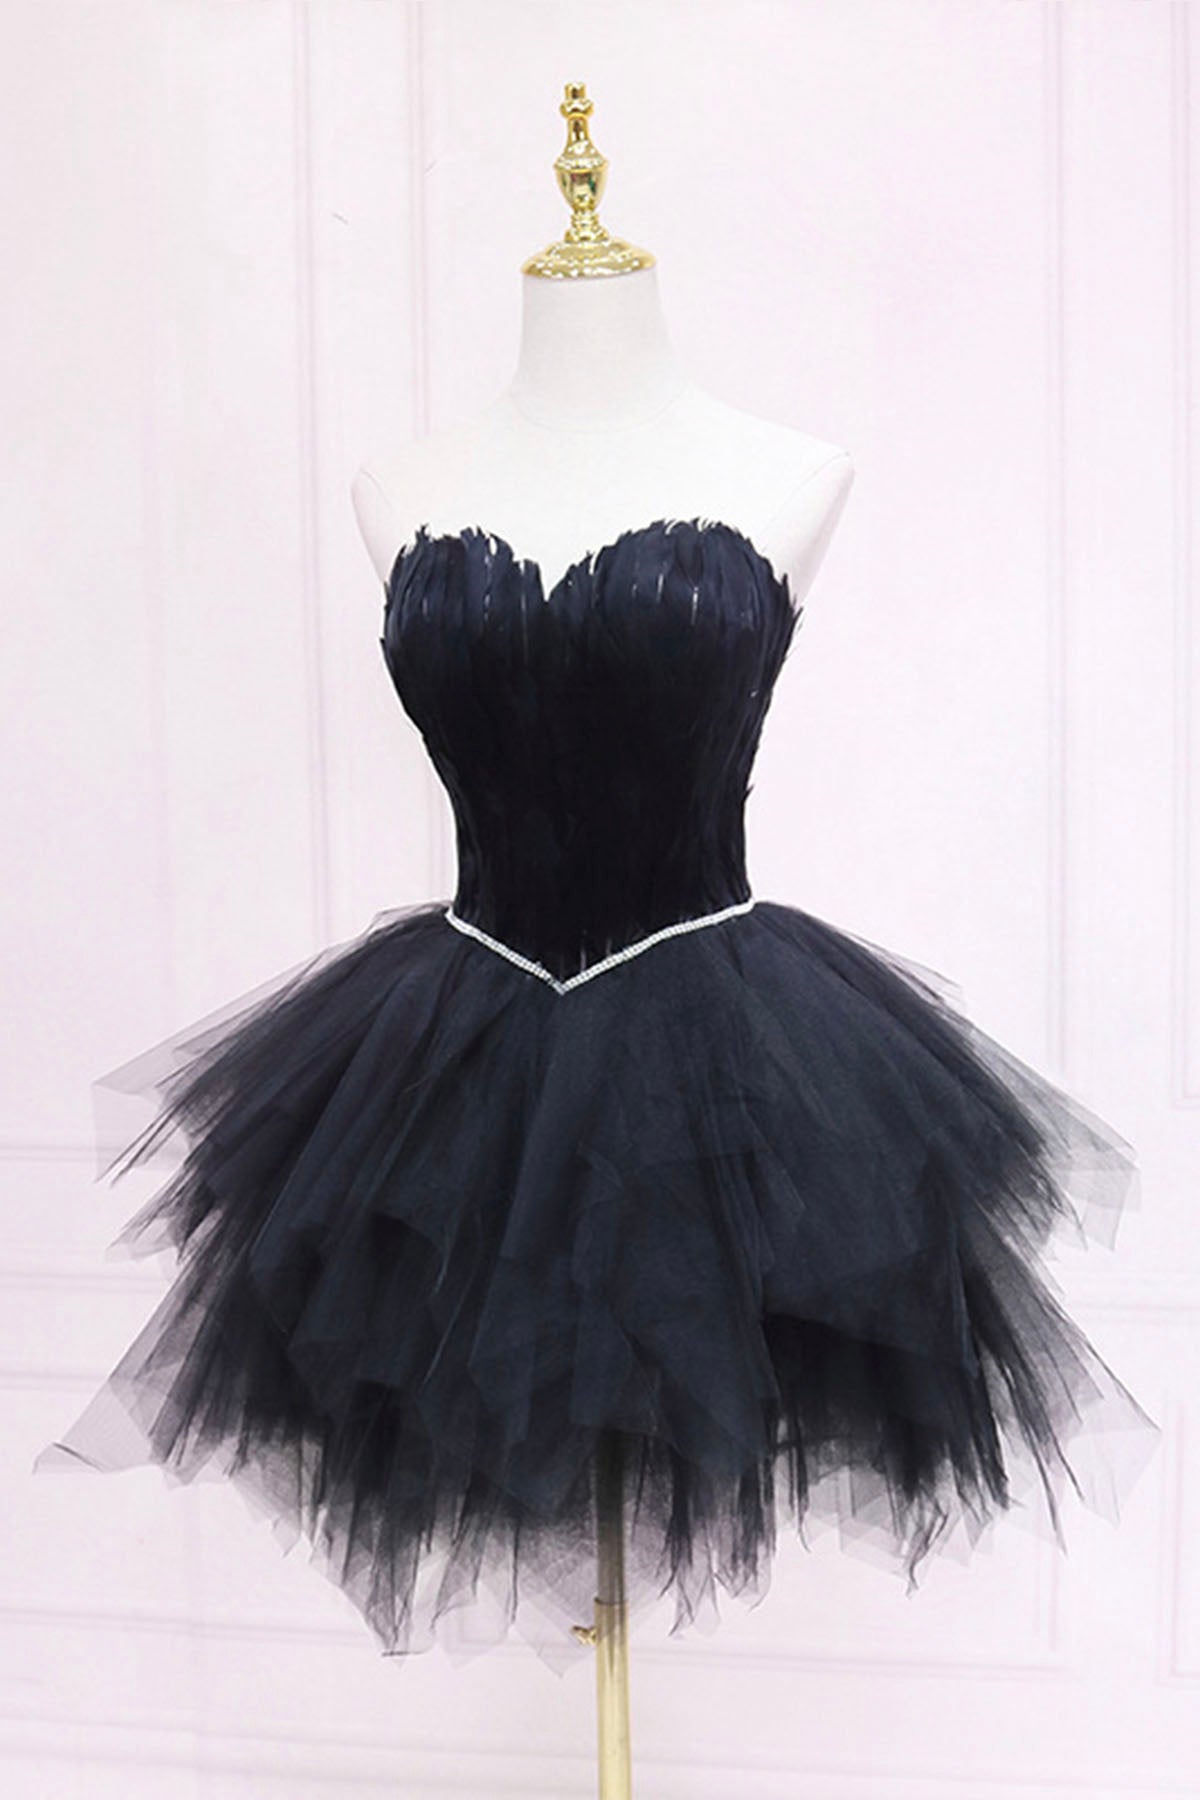 Black Tulle Short Corset Prom Dress with Feather, A-Line Sweetheart Neckline Party Dress Outfits, Dressy Outfit